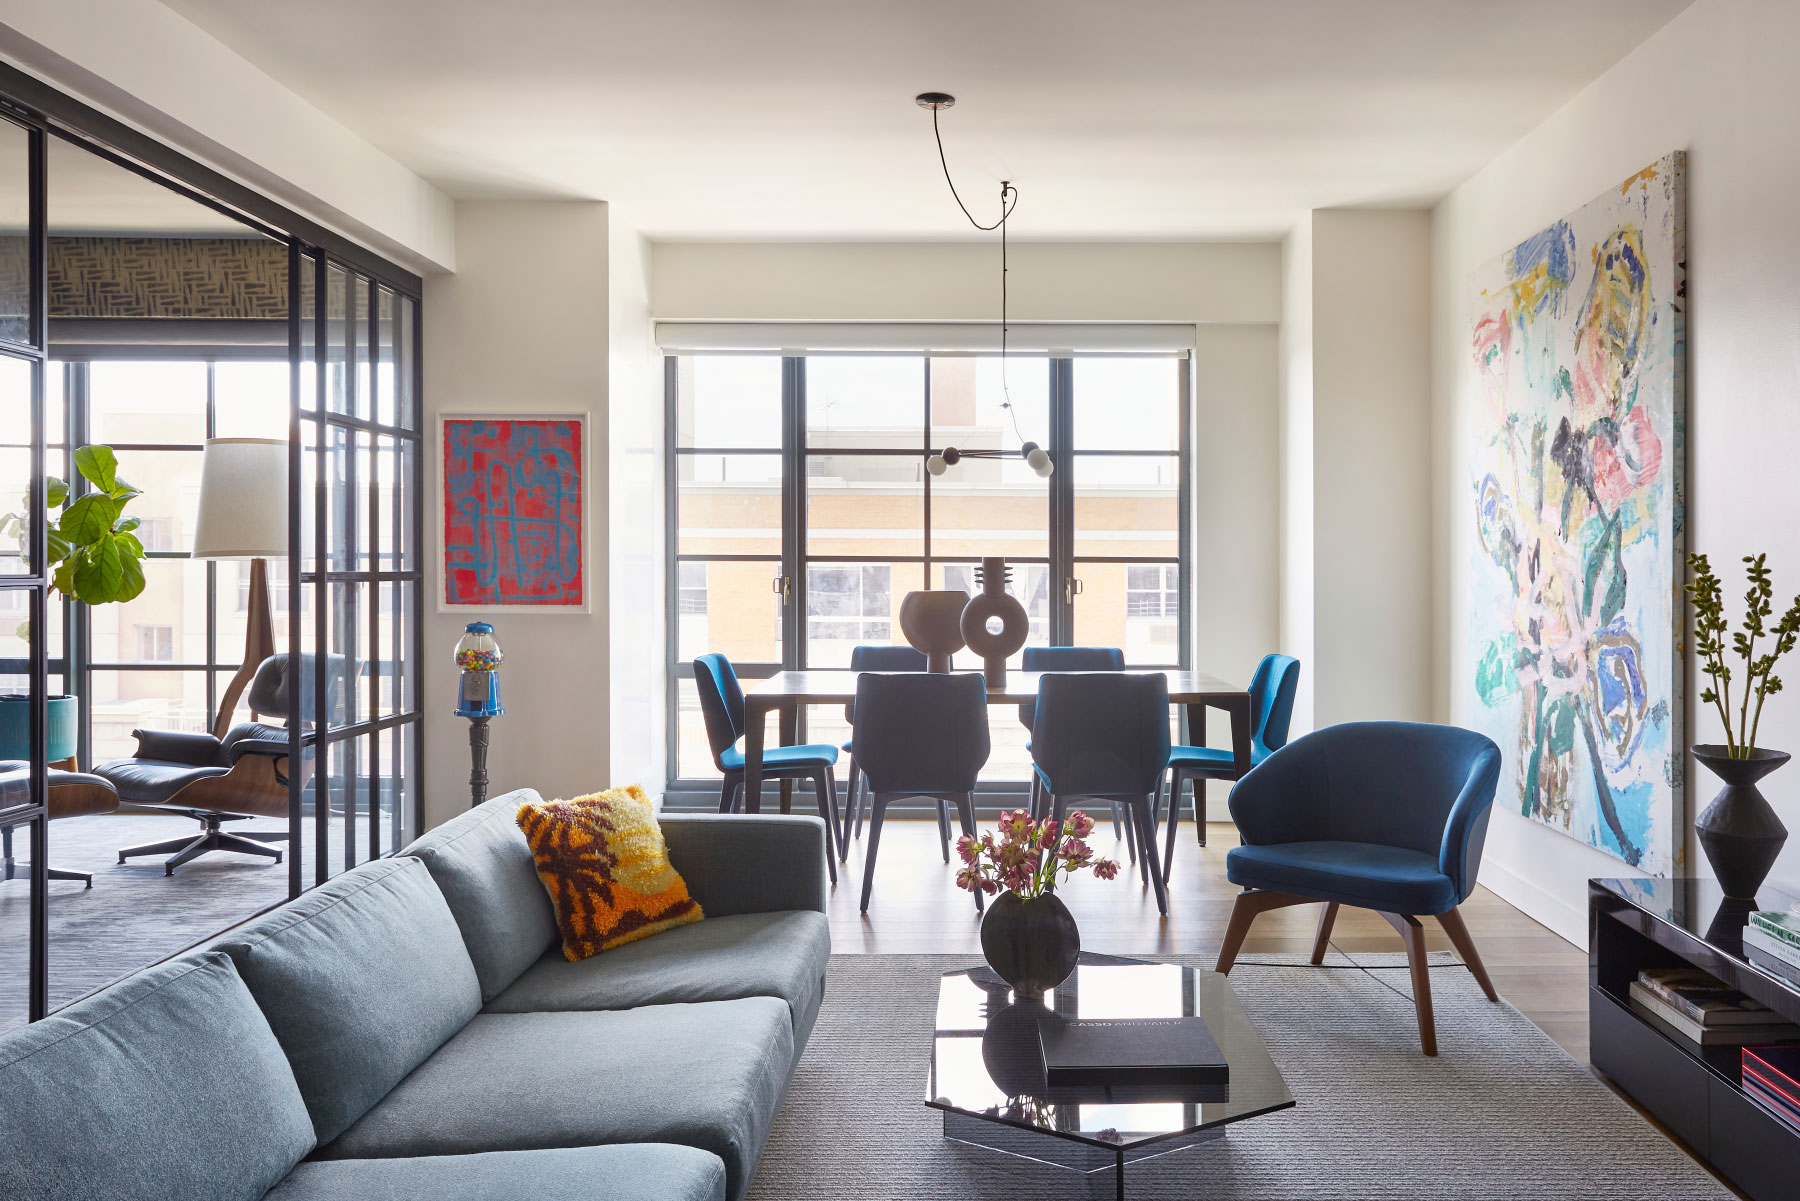 The living room of a HOME IN THE BOERUM HILL SECTION OF BROOKLYN designed by Tina Ramchandani